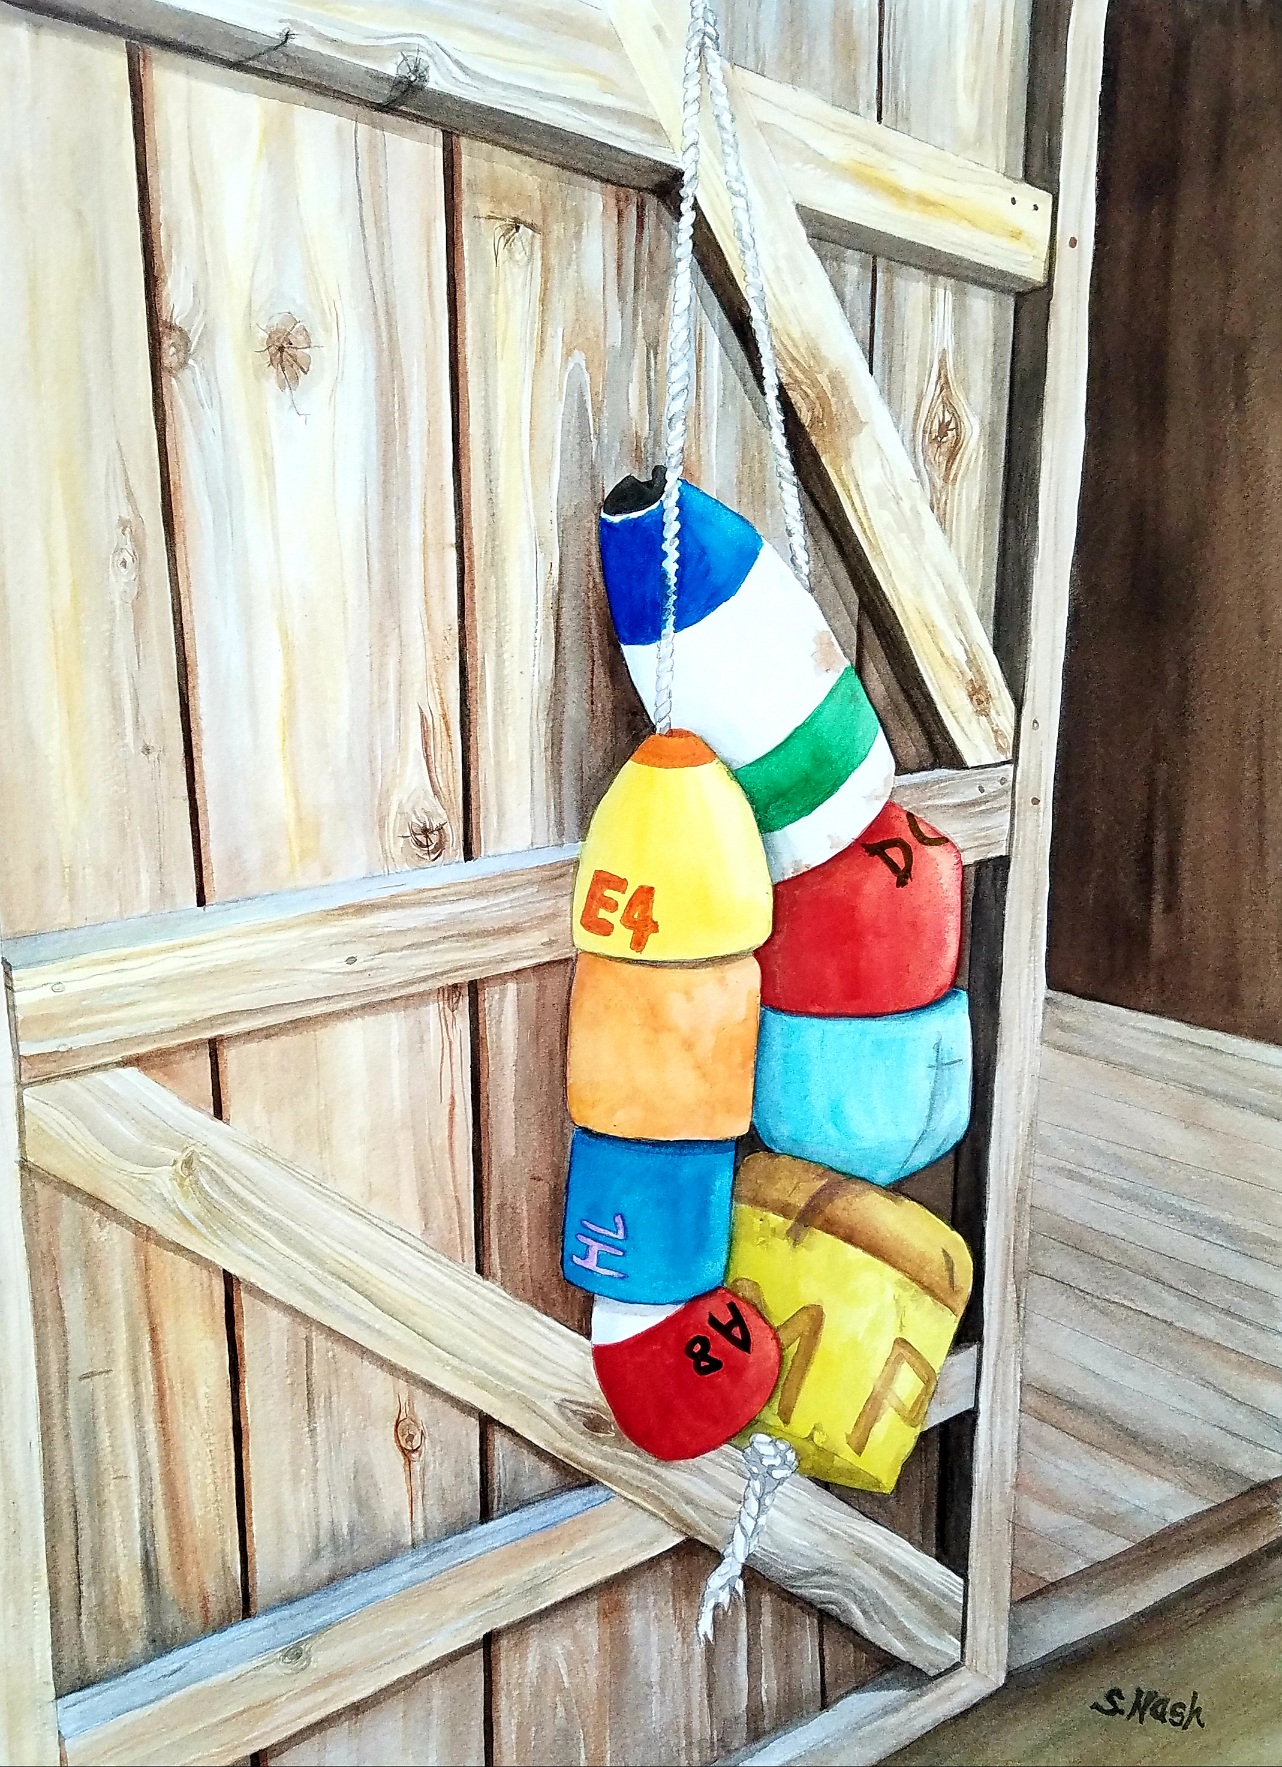 Watercolor painting of buoys by S. Hask